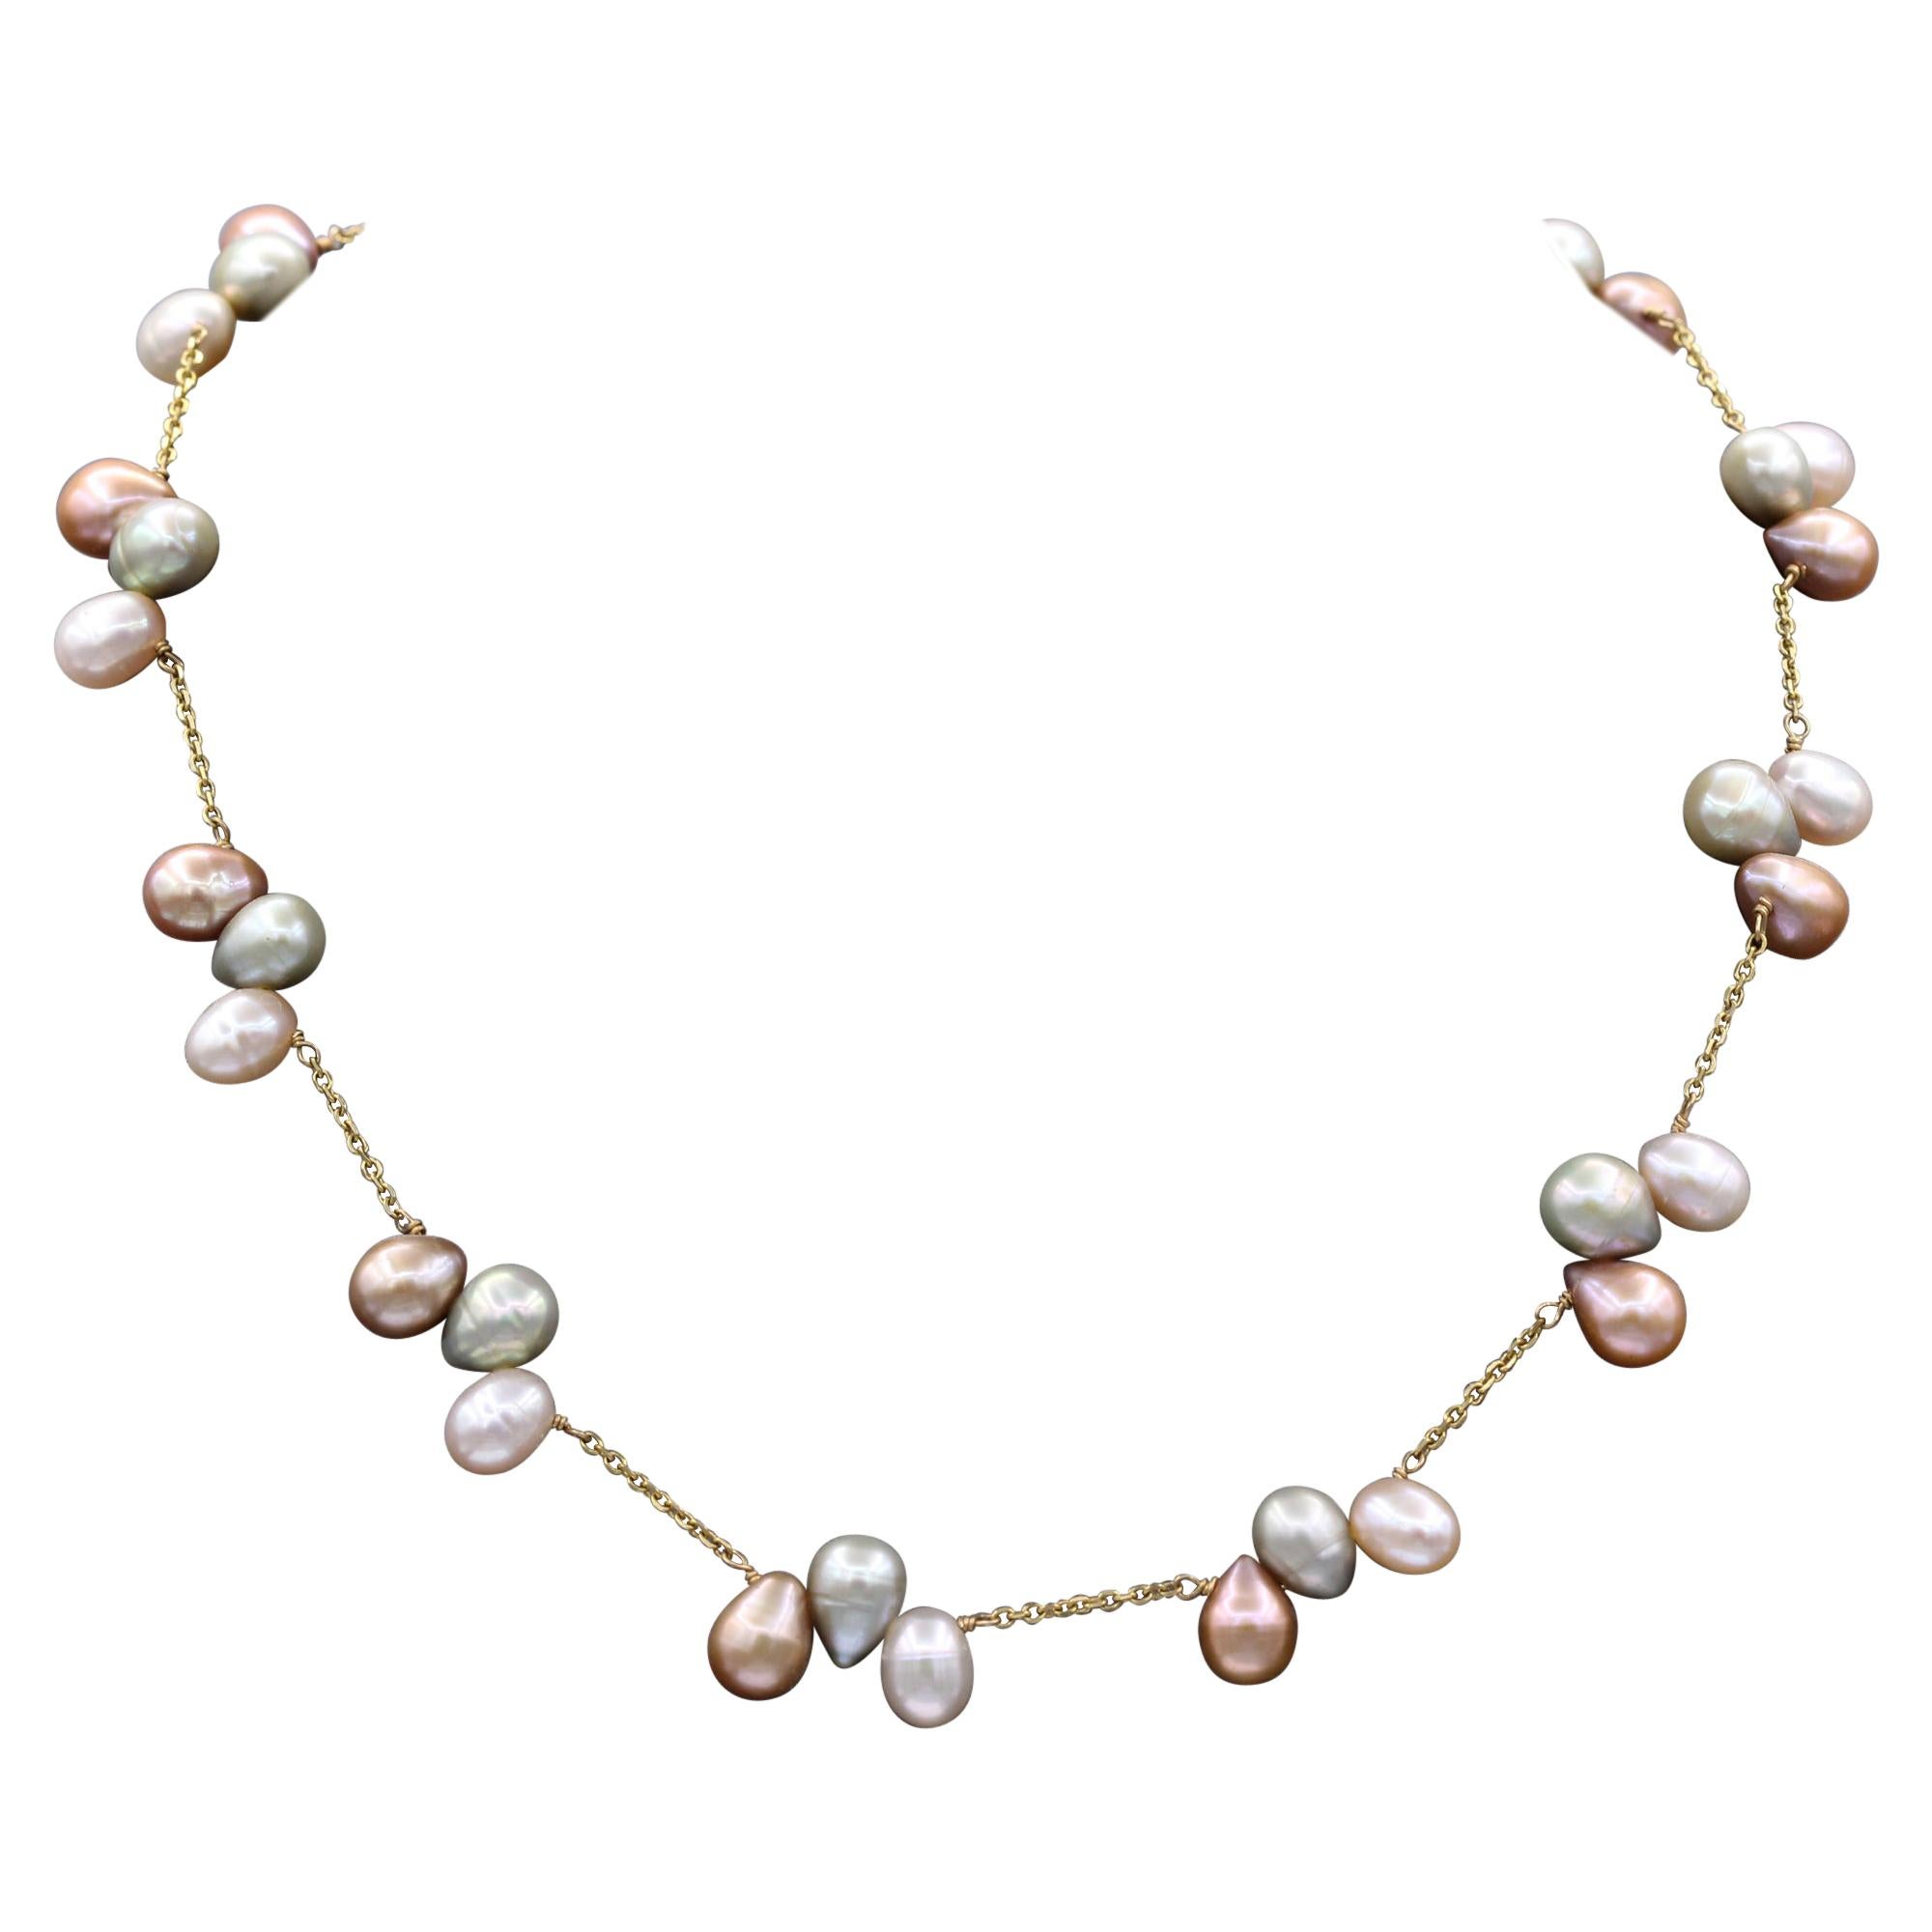 Pearl Necklace multicolored elegant Jewelry Chains Pearl Necklaces 